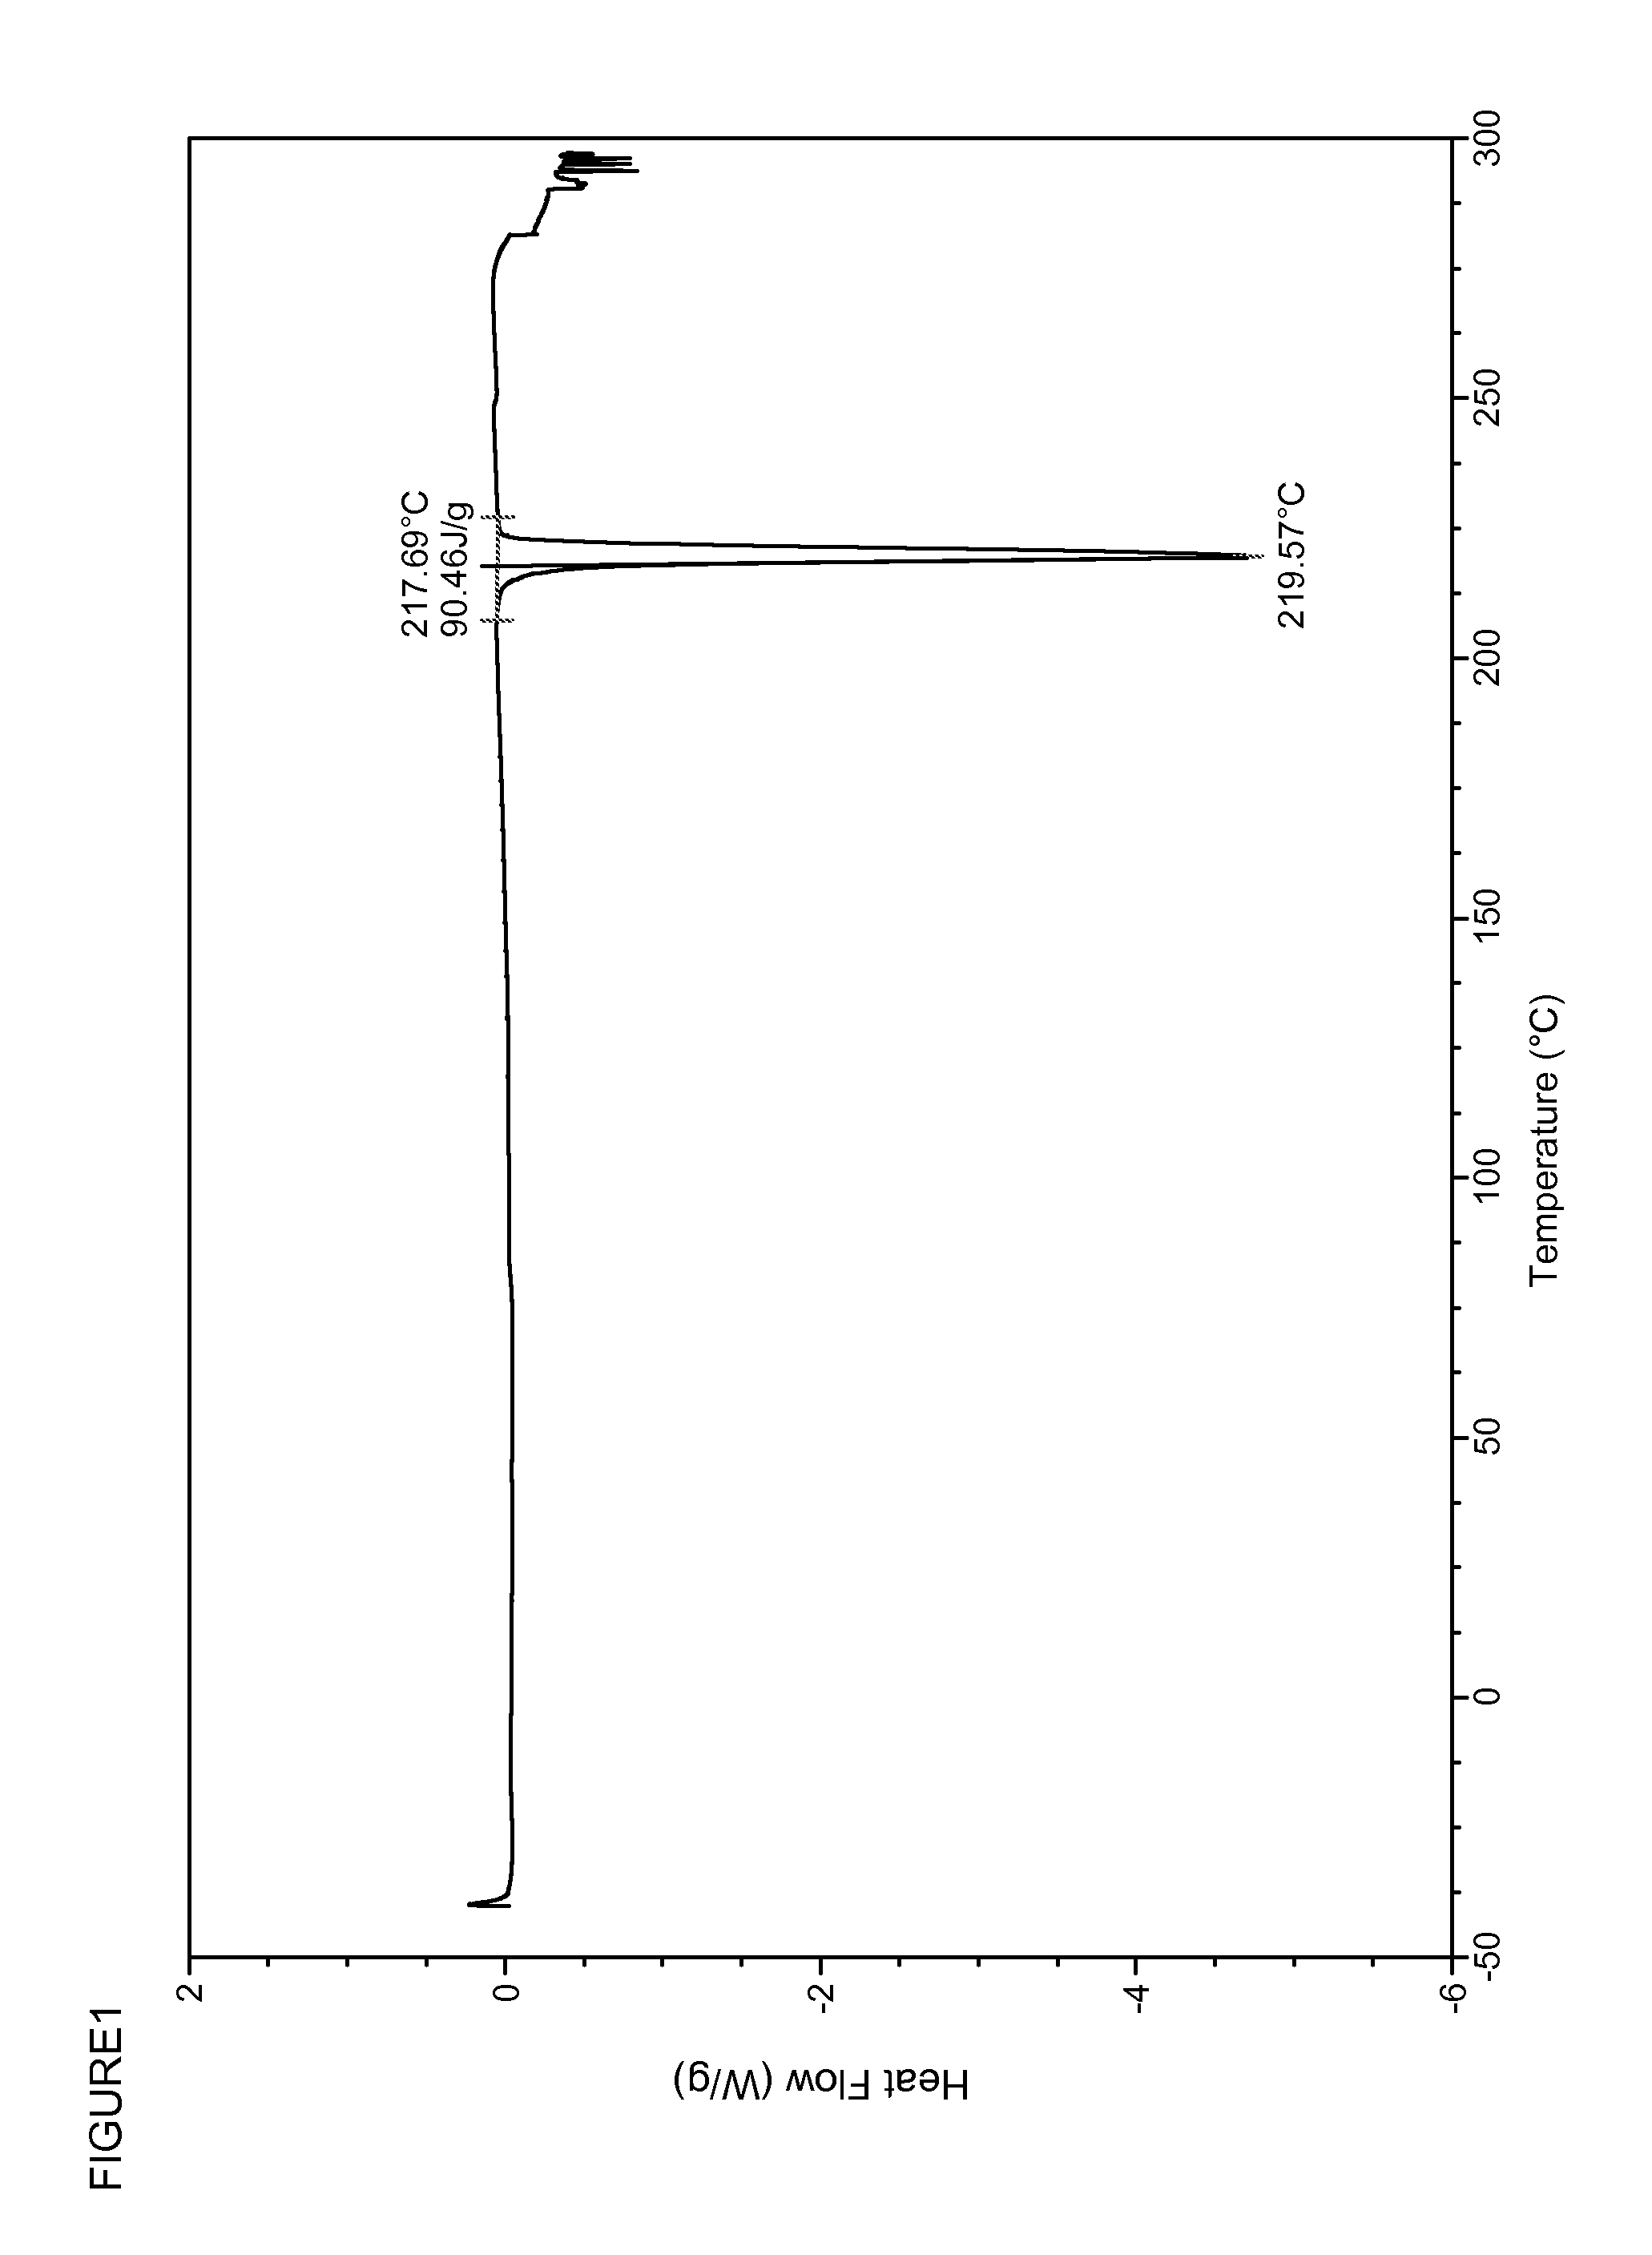 Oxazolidin-2-one compounds and uses thereof